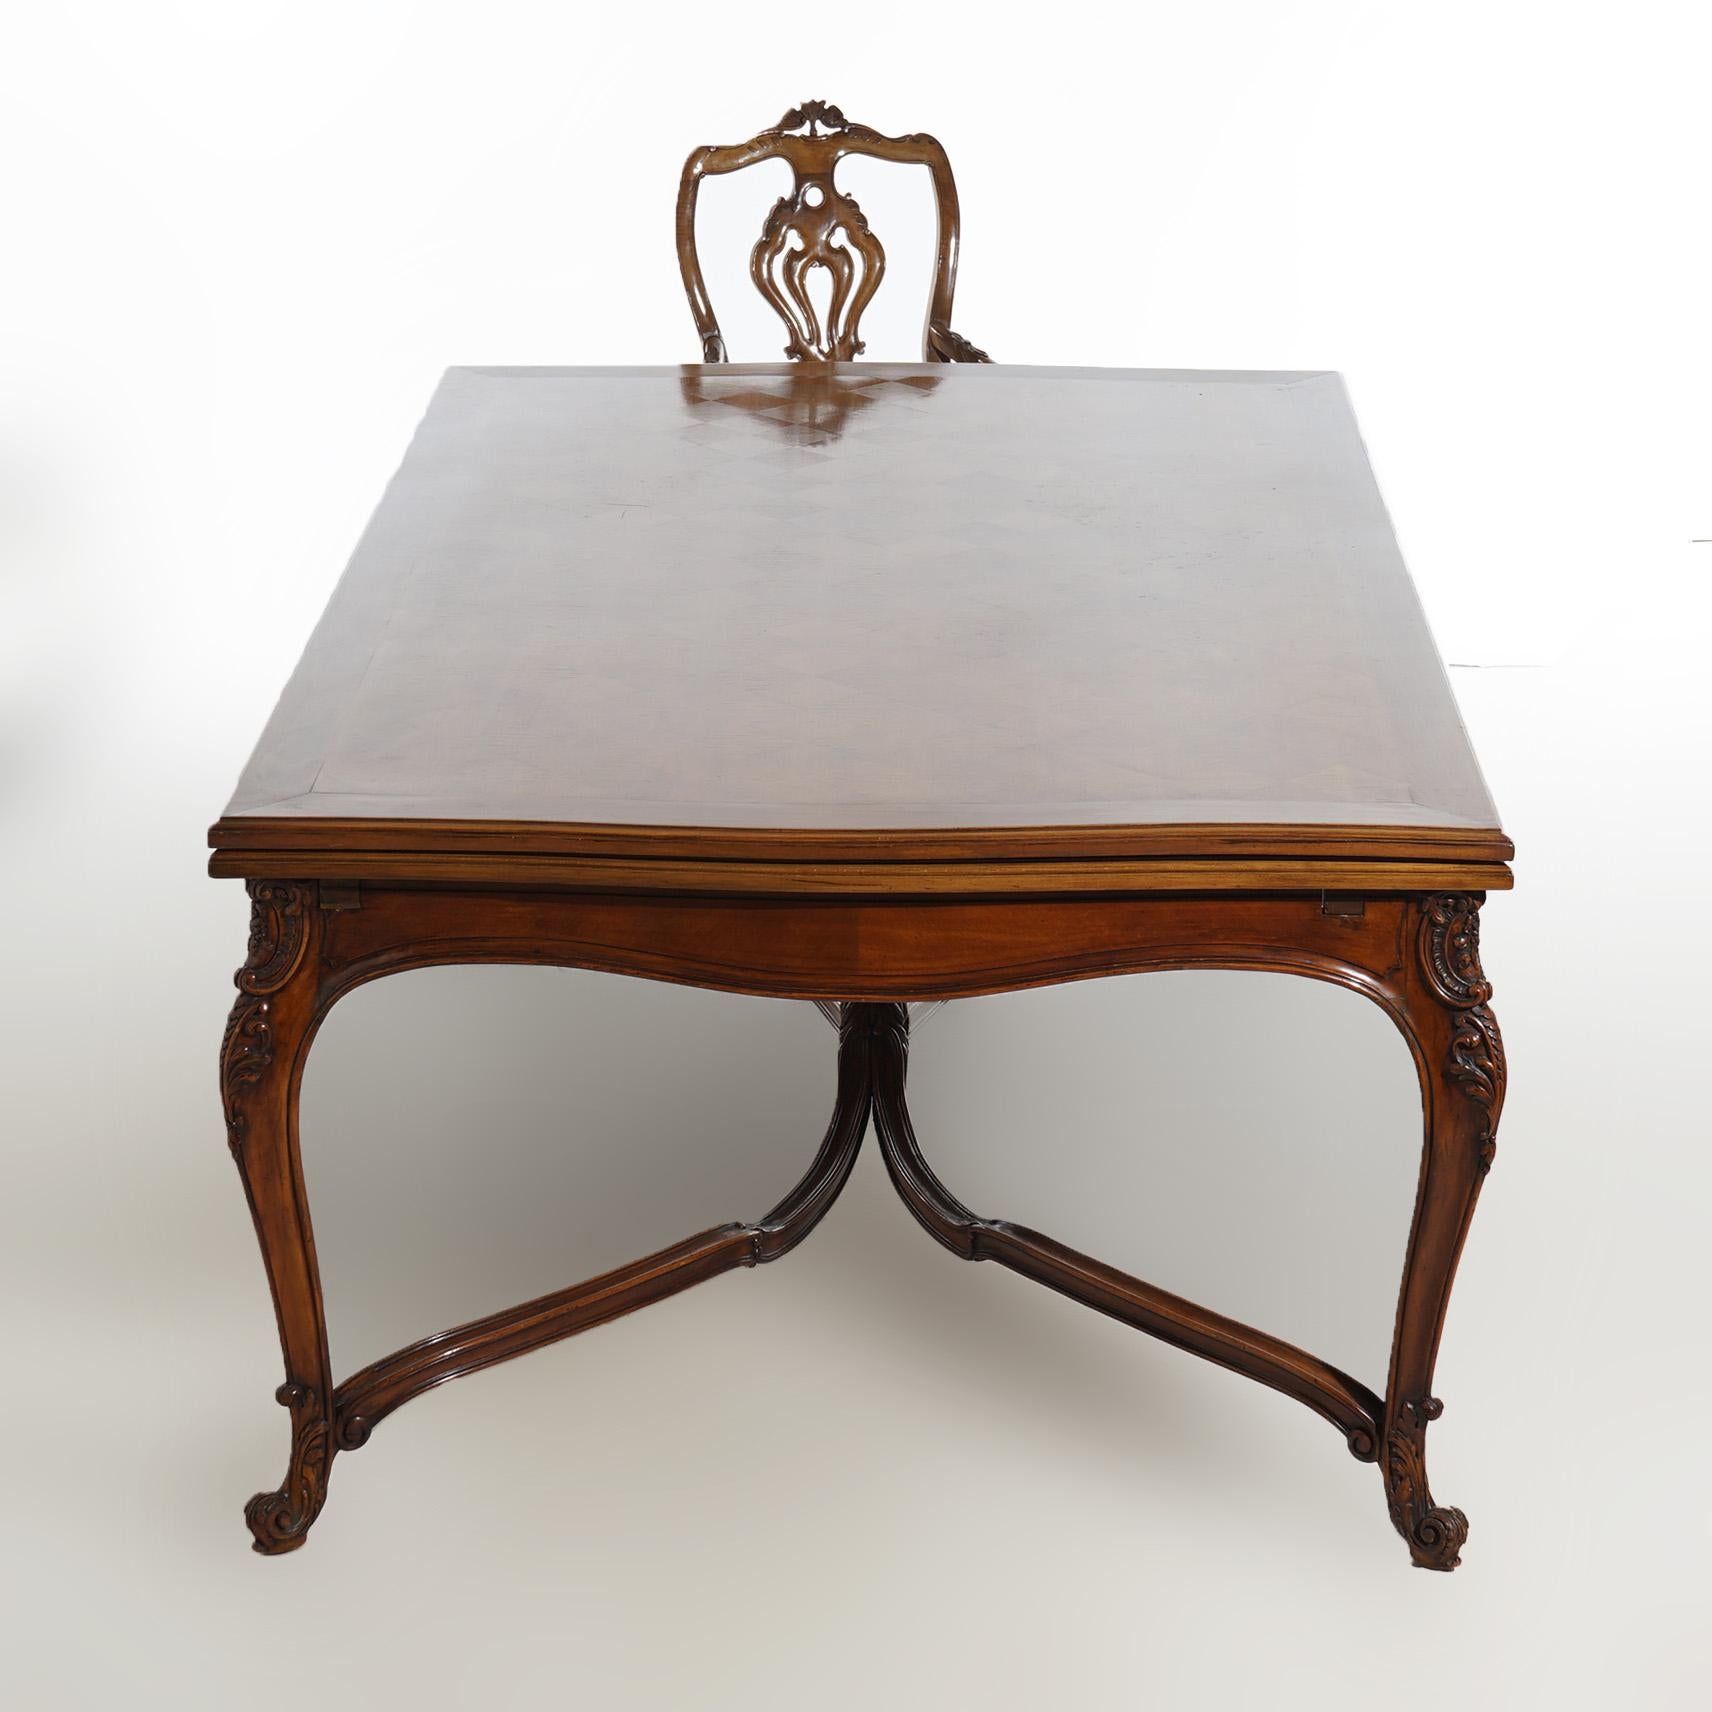 ***Ask About Reduced In-House Shipping Rates - Reliable Service & Fully Insured***

An antique French dining set offers walnut construction with dining table having parquetry and draw top over cabriole legs terminating in scroll from feet; eight